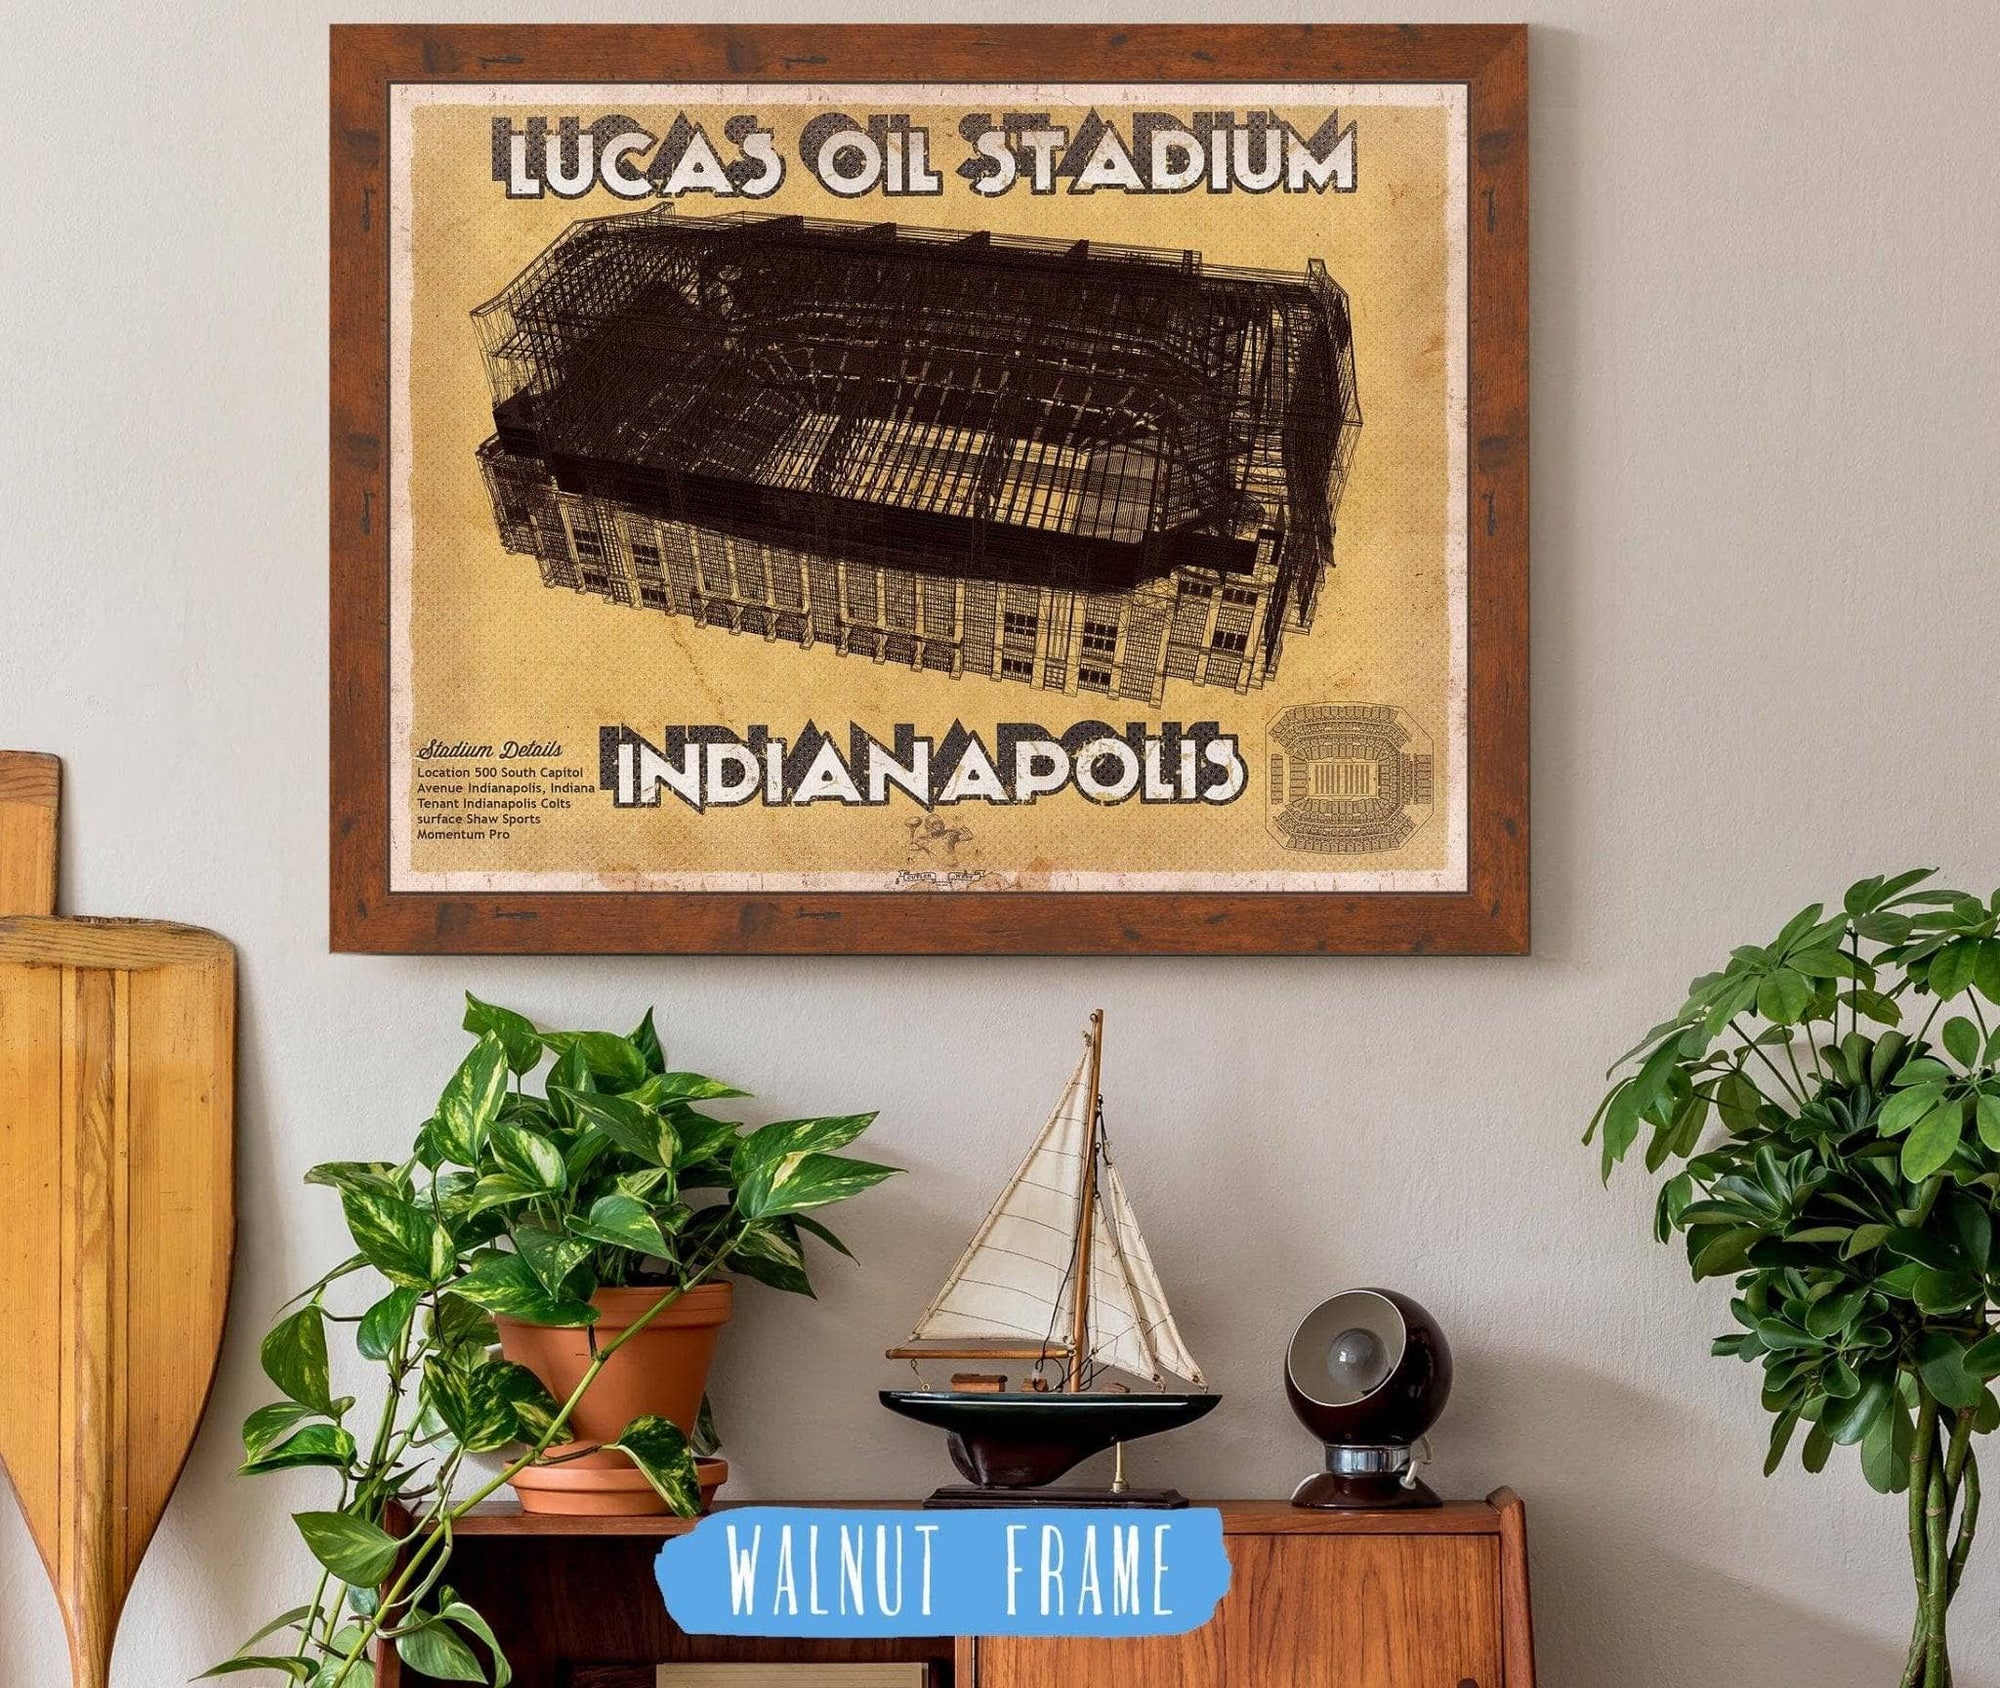 Cutler West Pro Football Collection 14" x 11" / Walnut Frame Indianapolis Colts Lucas Oil Stadium Vintage Football Print 700666450_64975